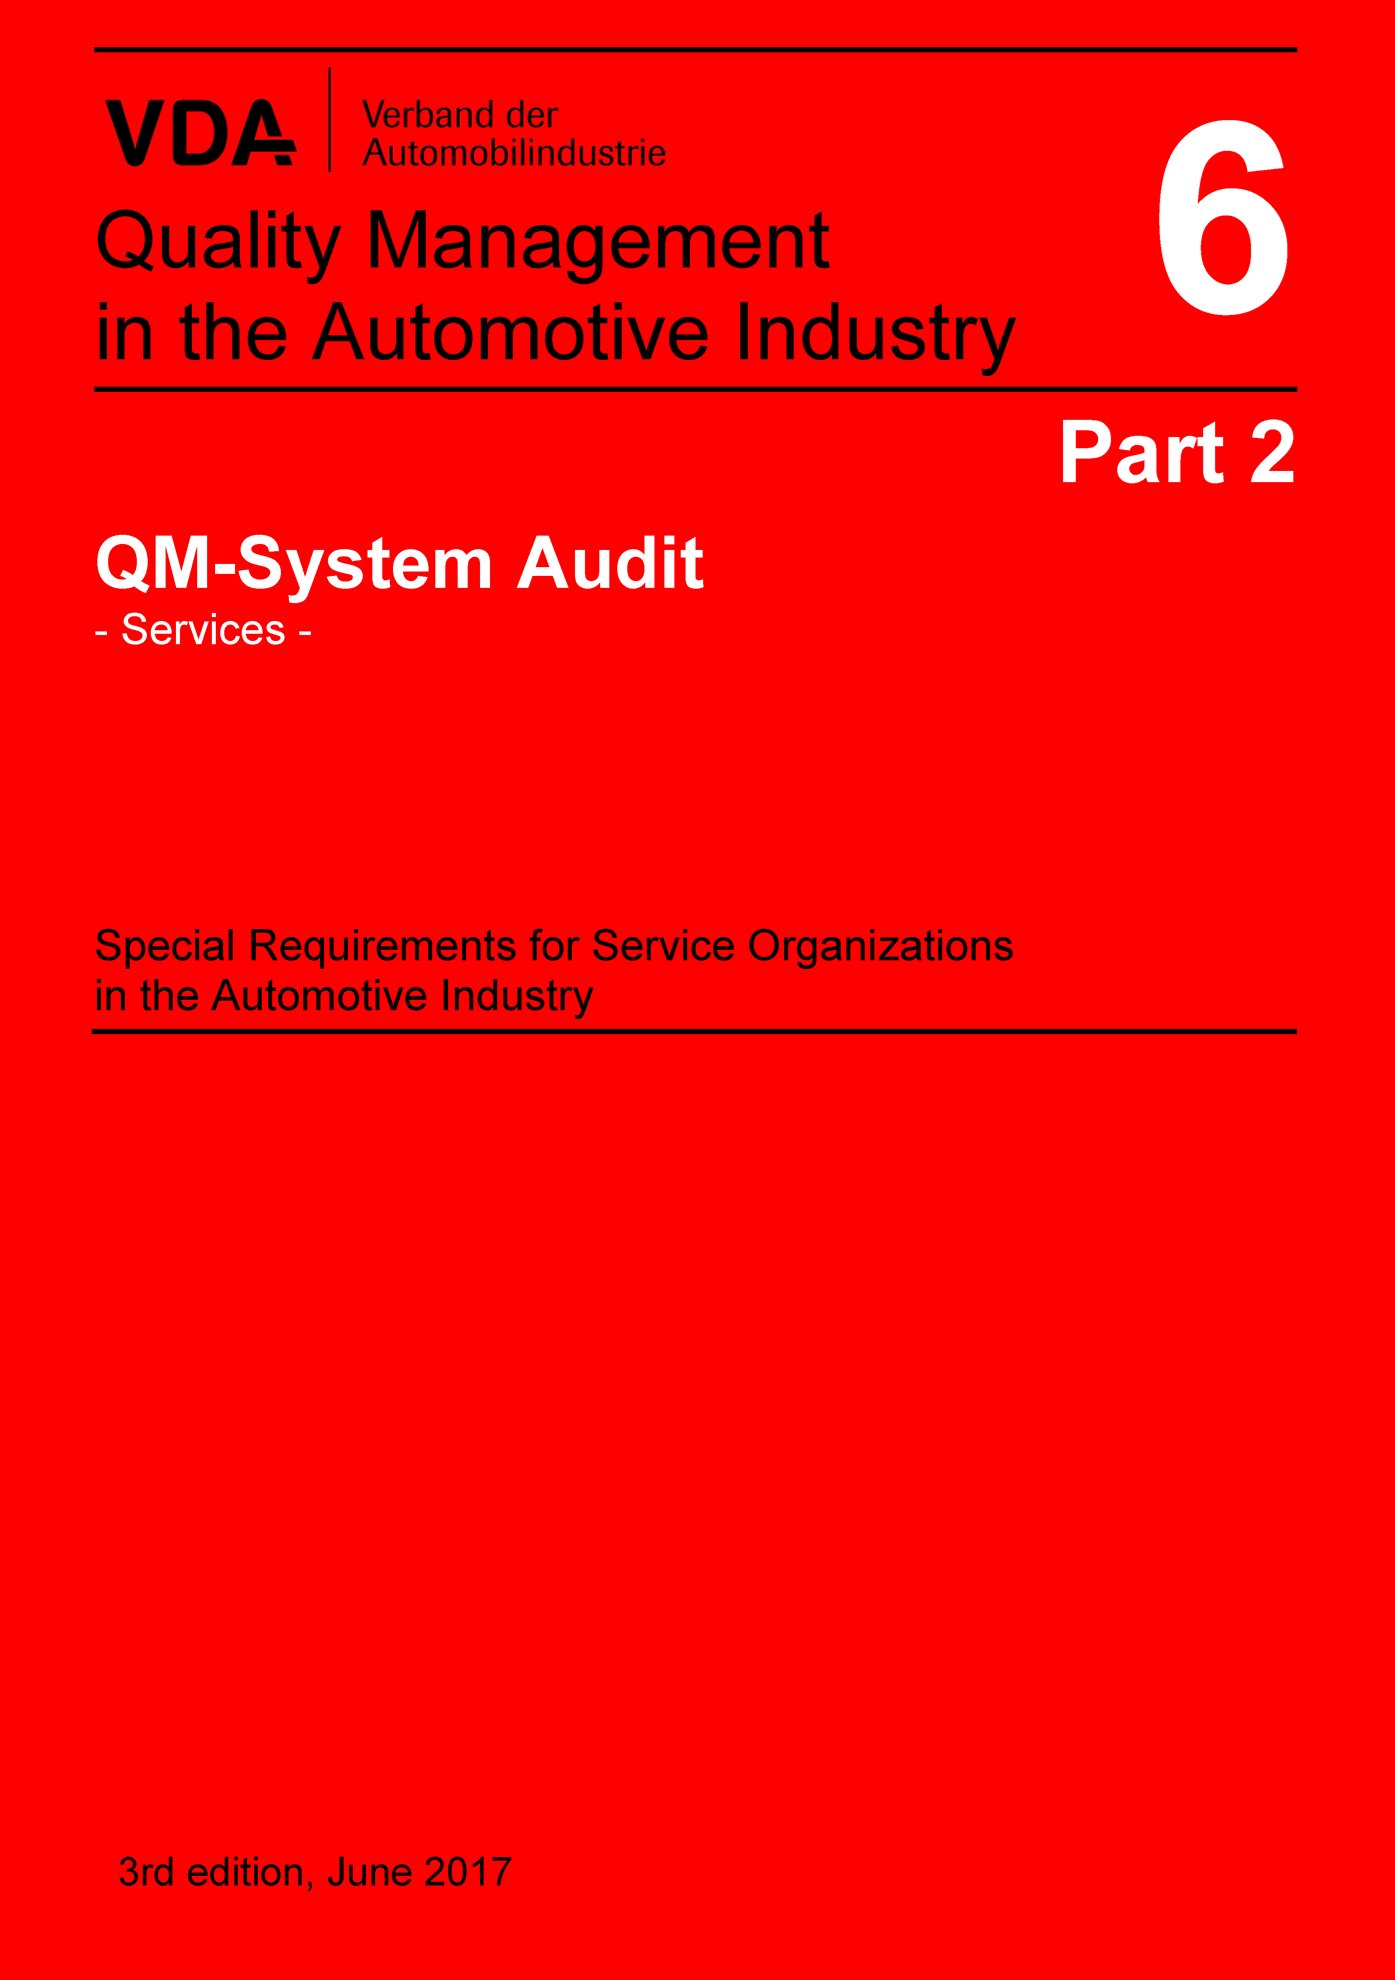 Publikace  VDA Volume 6 Part 2_QM System Audit - Services -
 Special Requirements for Service Organizations in the Automotive Industry
 3rd Edition, June 2017 1.6.2017 náhled